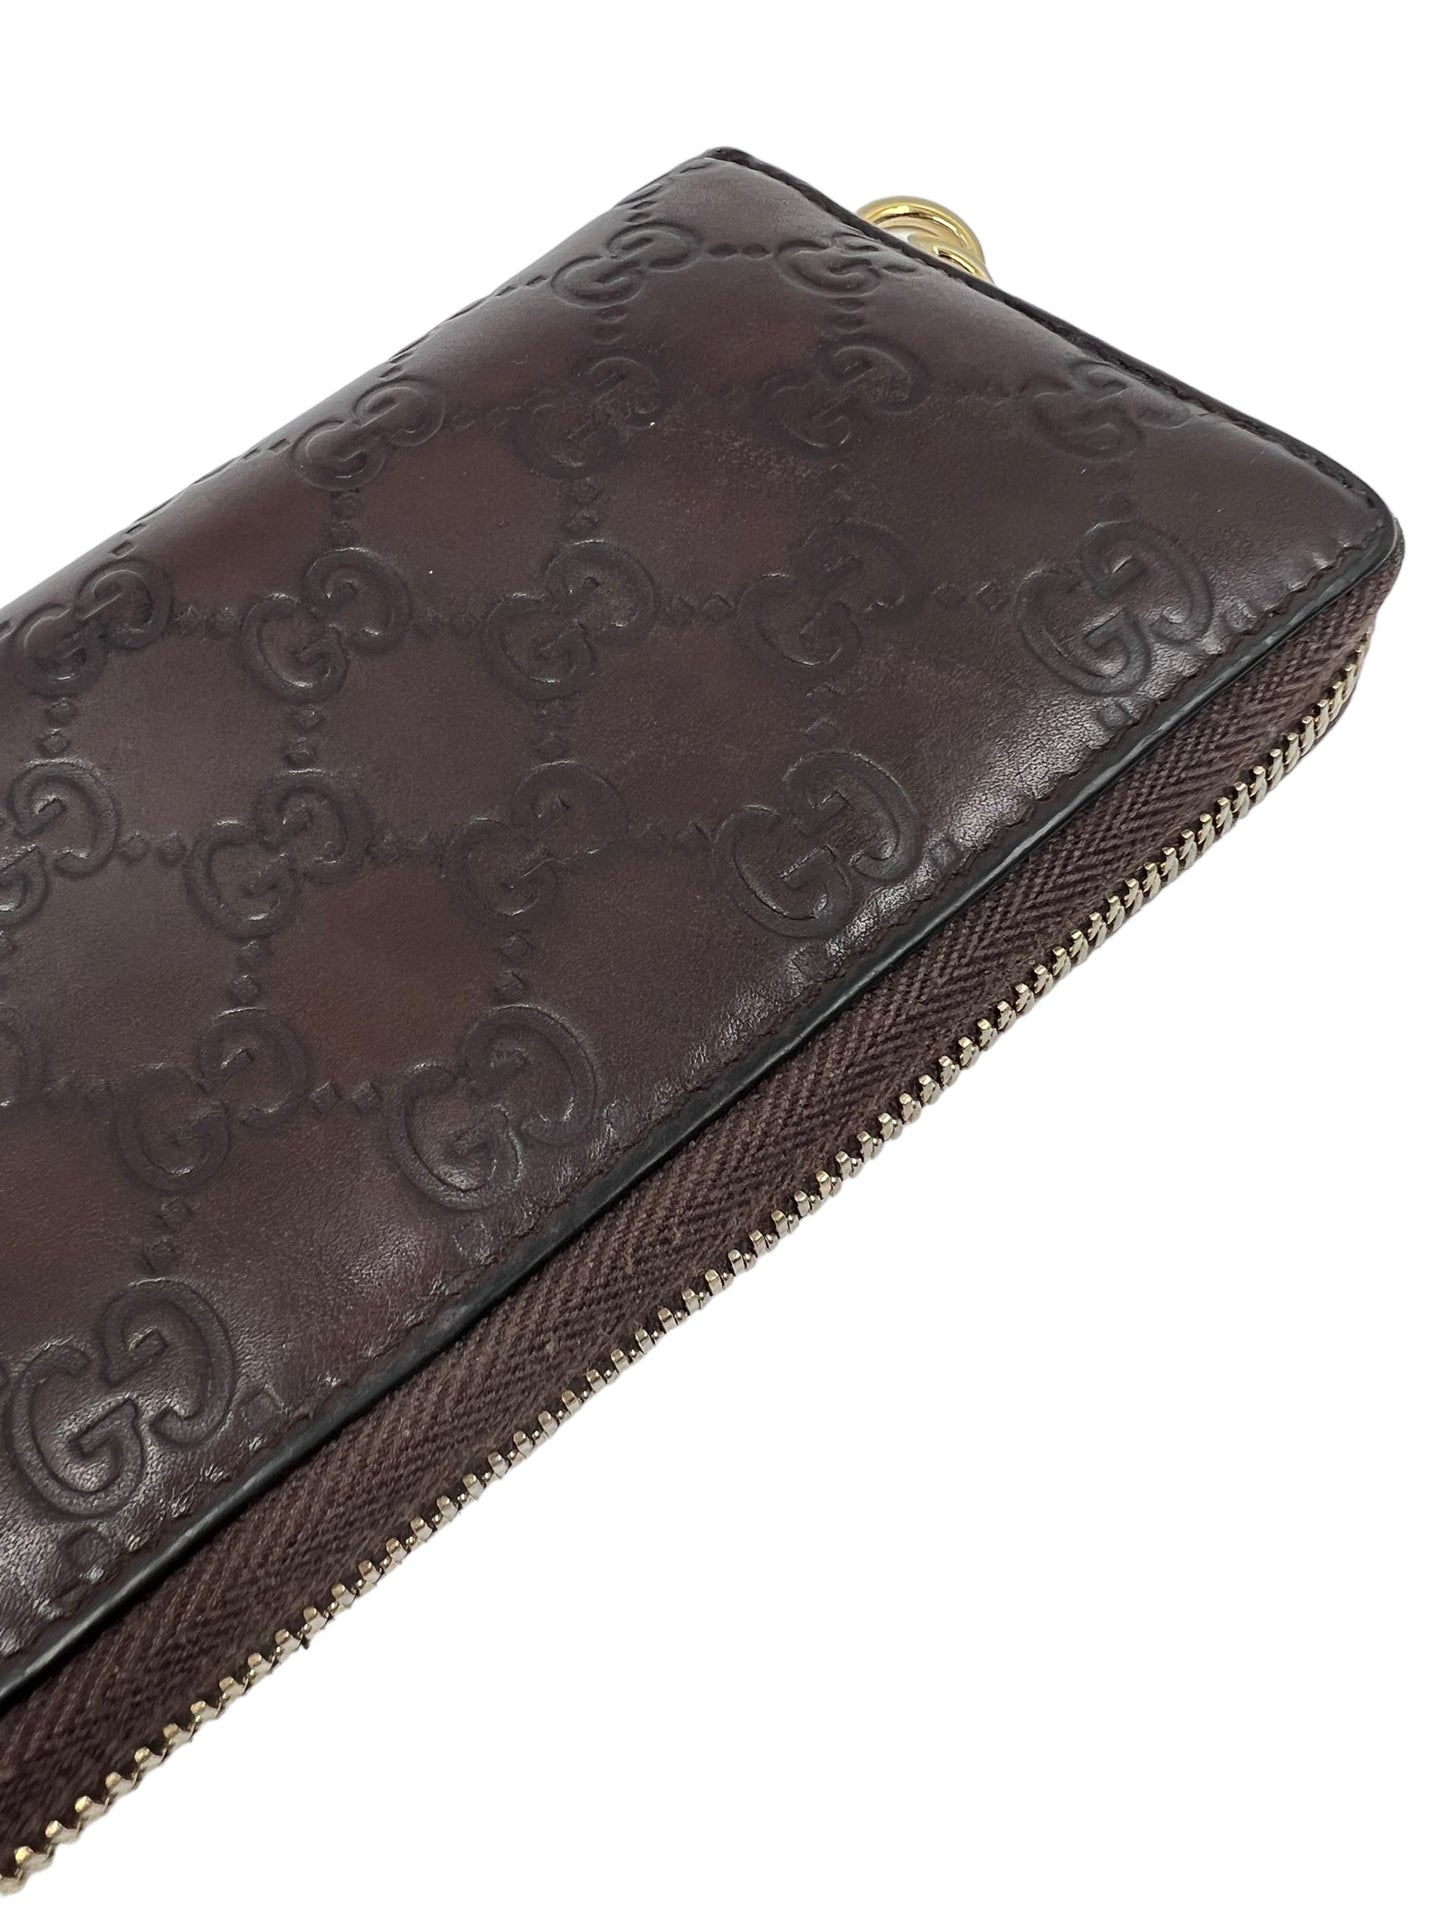 Gucci Brown Leather Guccissima Continental Zip Around Wallet